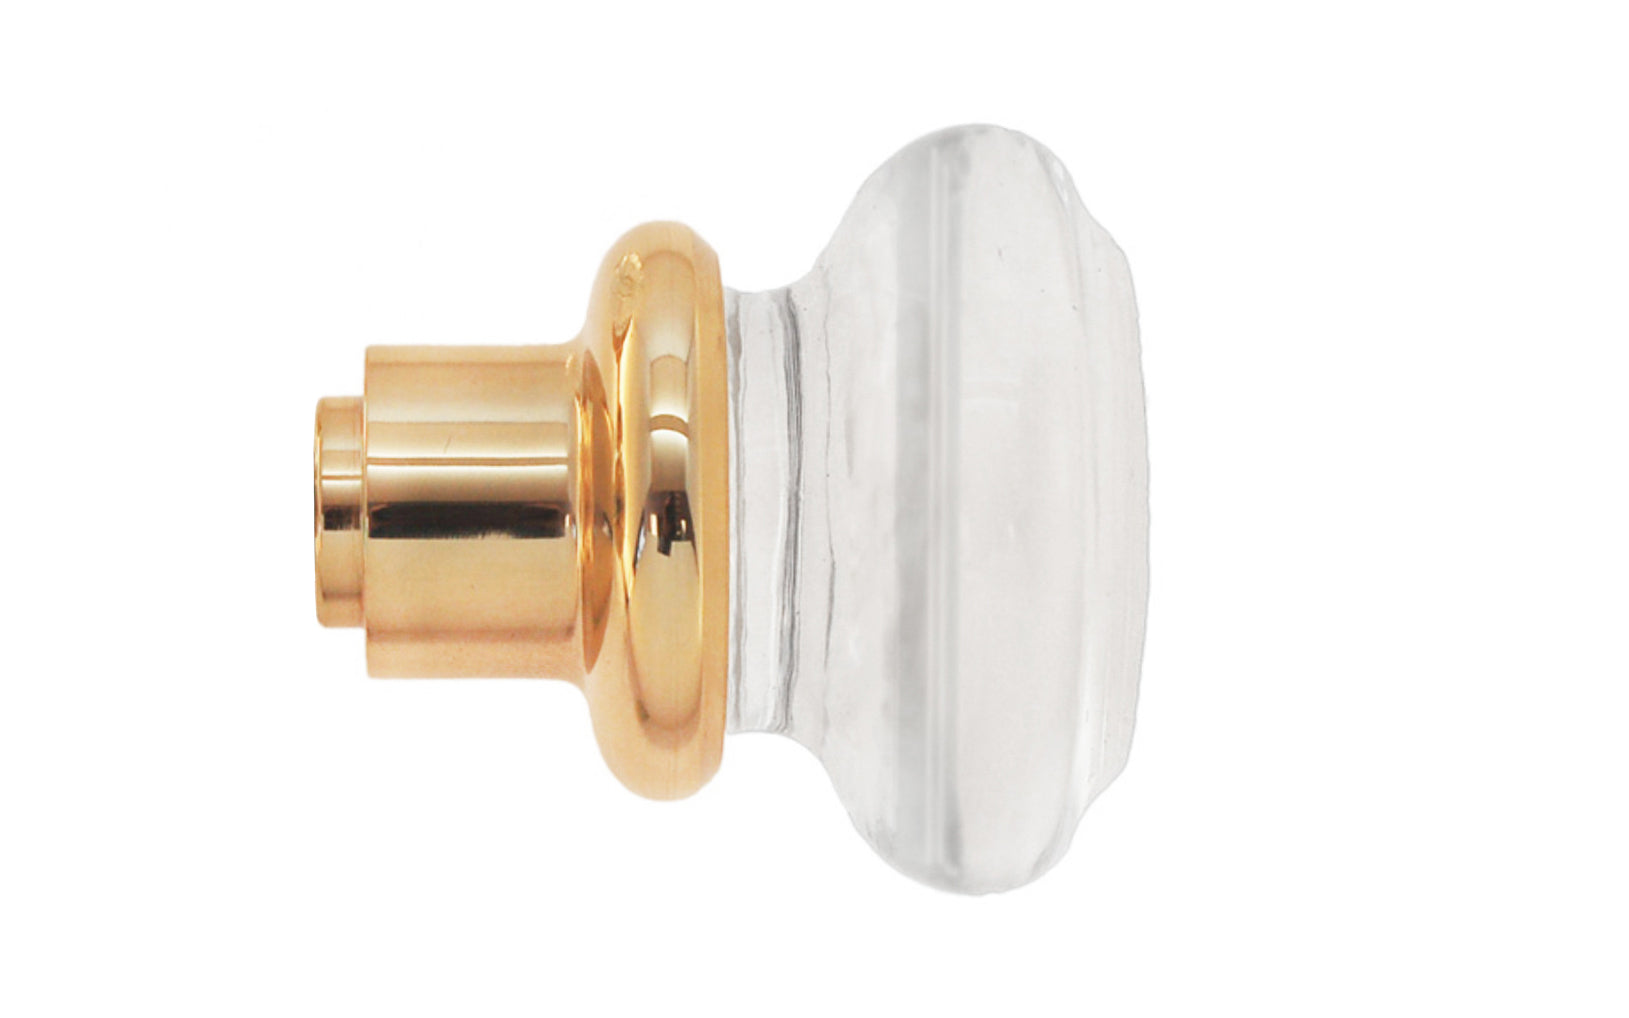 Single Classic Round Clear Glass Doorknob. A high quality & genuine glass doorknob with an attractive round design. The sparkling center point under glass amplifies reflected light to showcase beautiful facets. Solid brass base. Reproduction Glass Door Knobs. Traditional Round Glass Knobs. One knob. Unlacquered brass (will patina naturally), Non-Lacquered Brass.